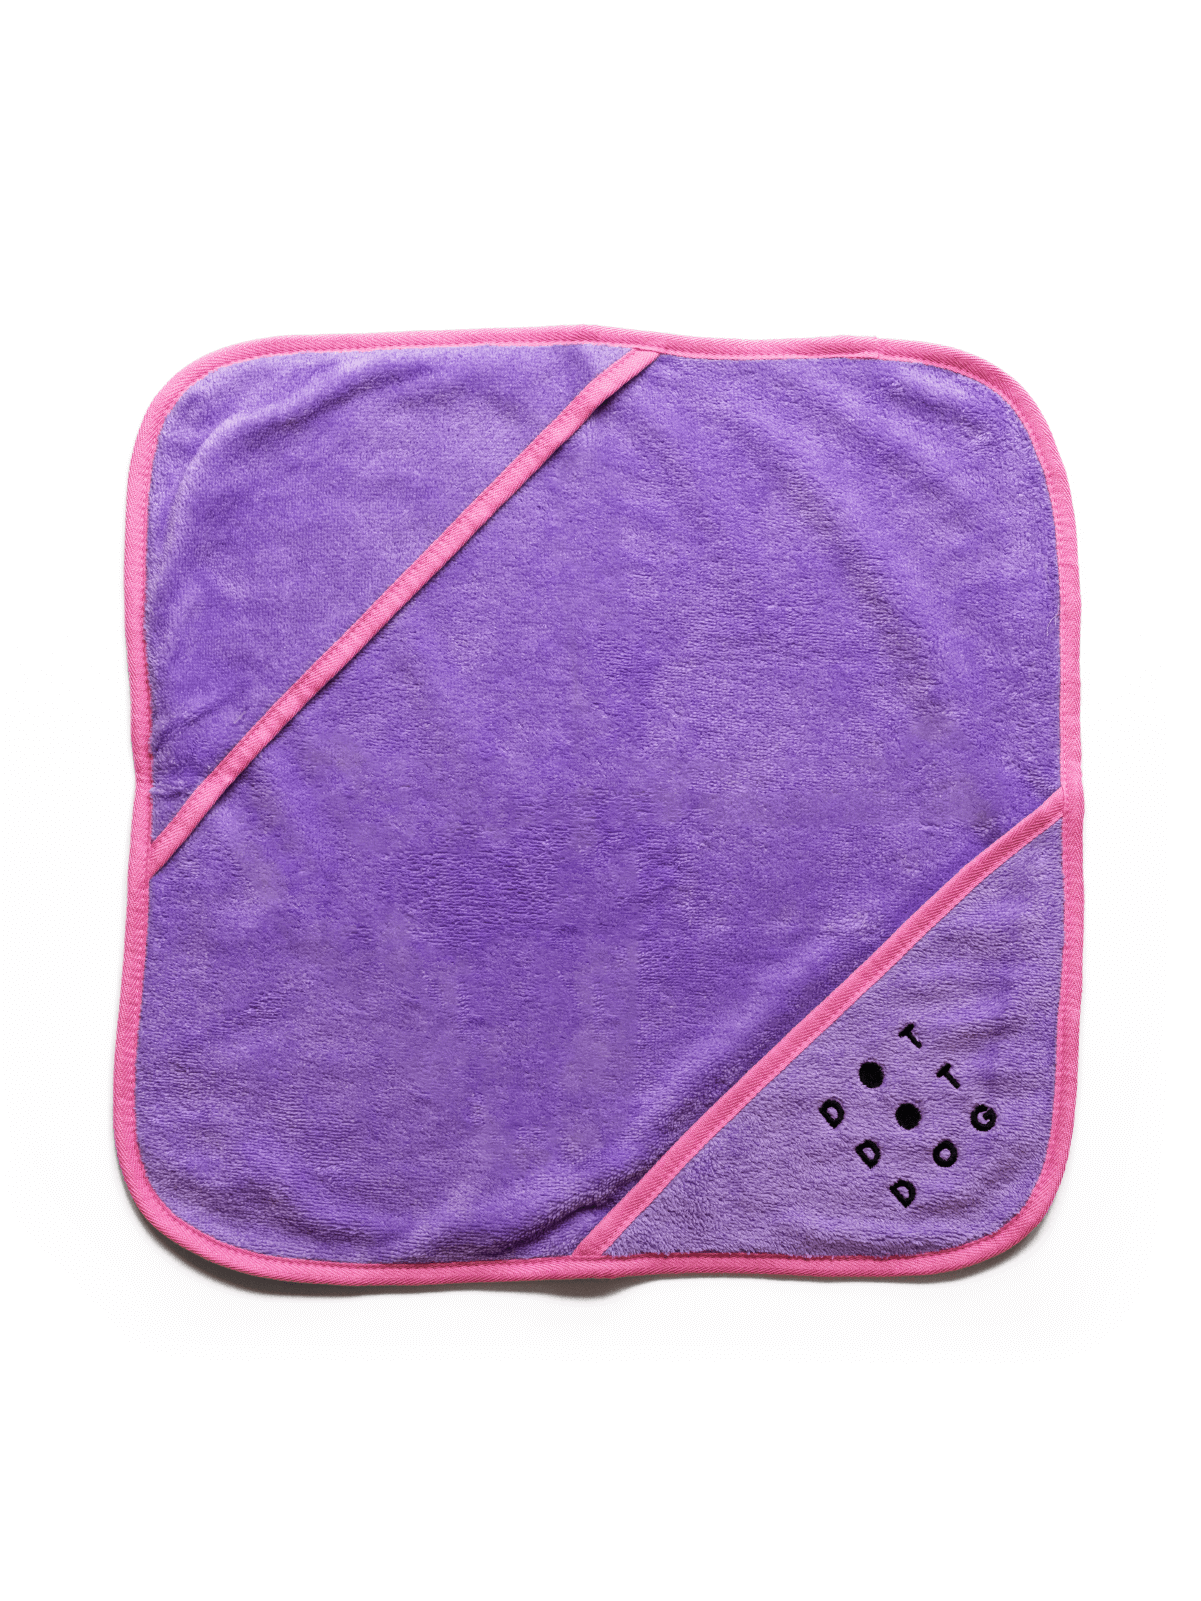 Bamboo dog towel for puppies and small dogs towel open showing drying pockets super soft quick drying